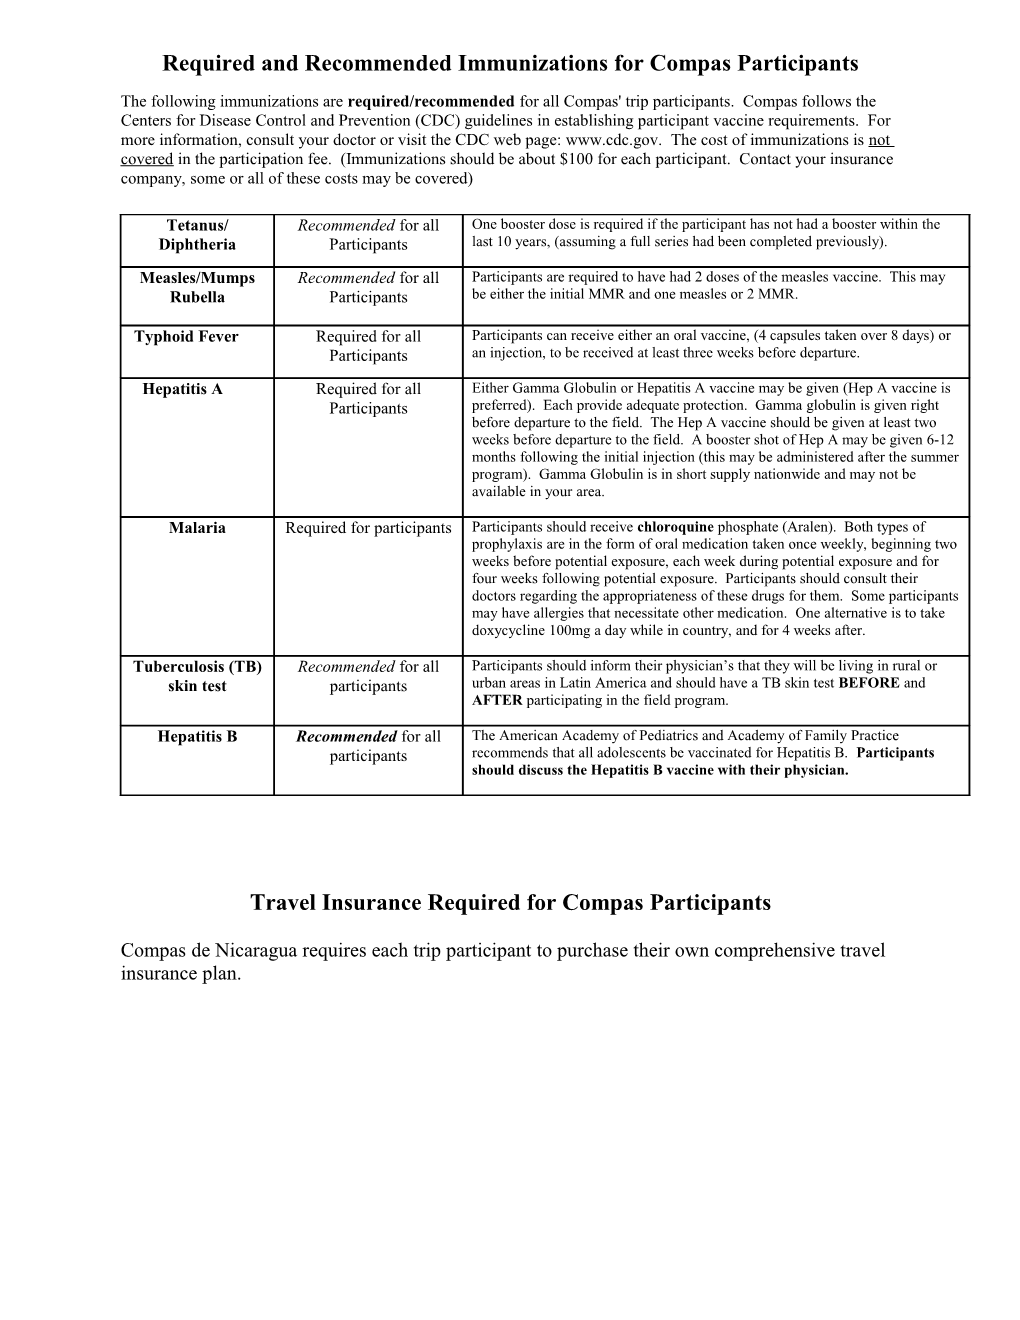 Required and Recommended Immunizations for Compas Participants